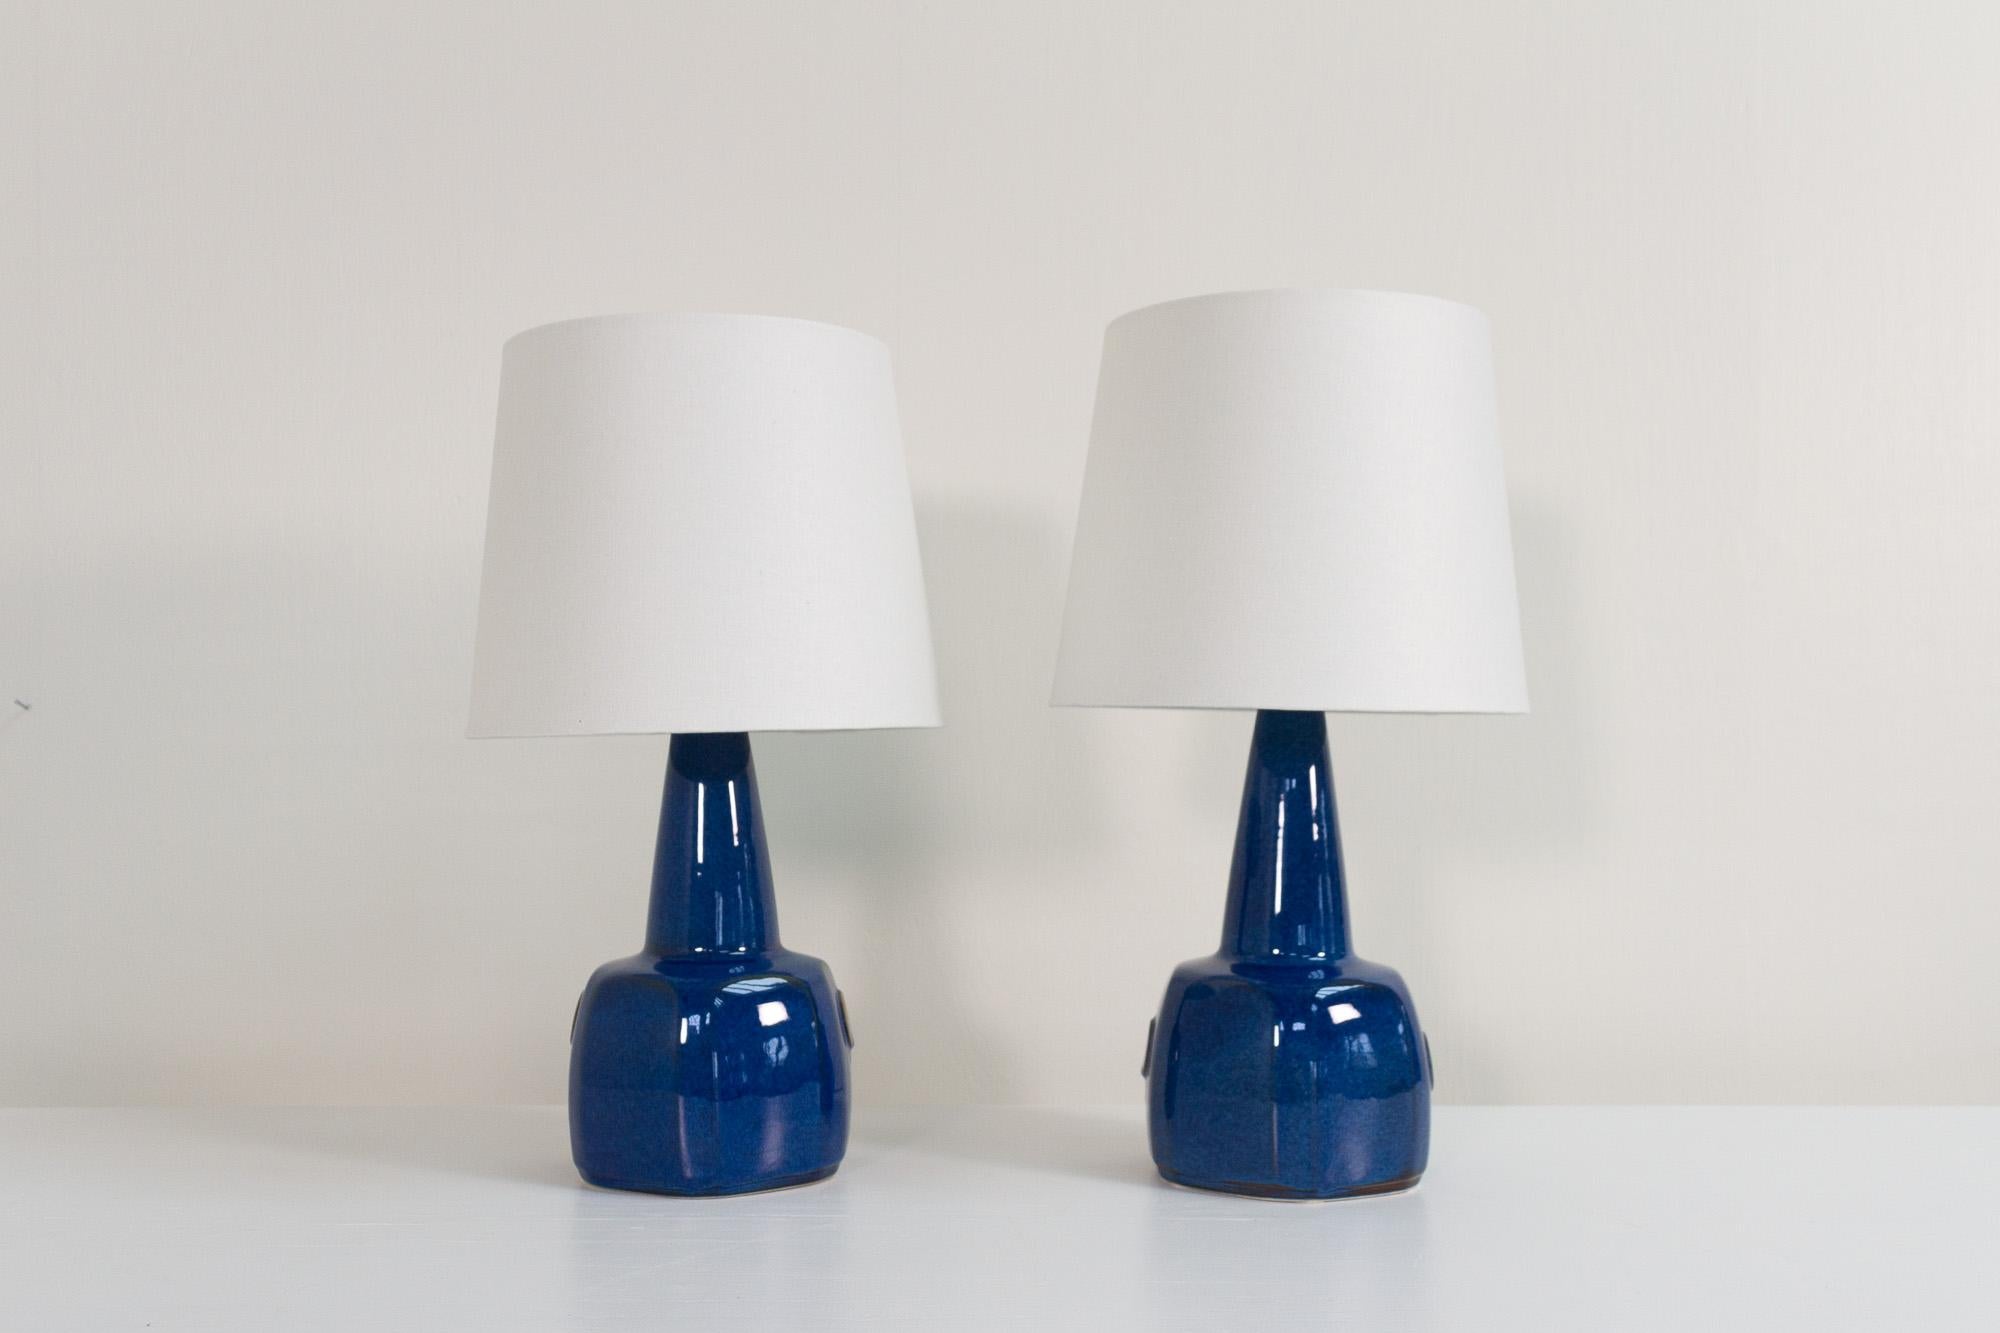 Mid-20th Century Pair of Danish Modern Ceramic Table Lamps by Einar Johansen for Søholm, 1960s